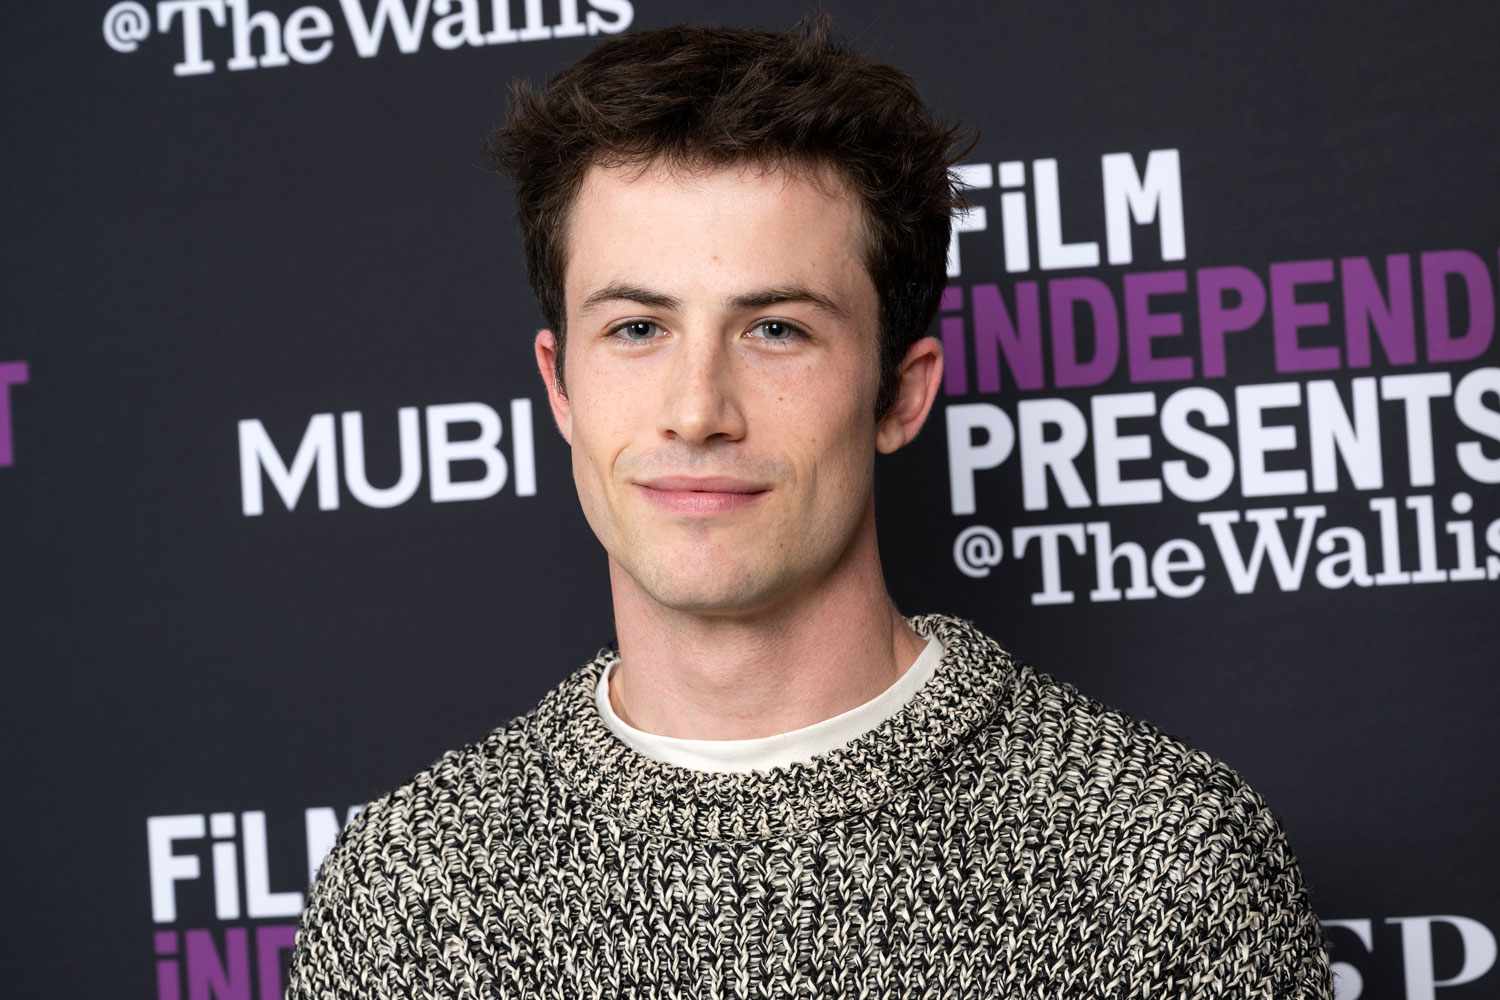 Why Dylan Minnette Quit Acting After '13 Reasons Why' and 'Scream'